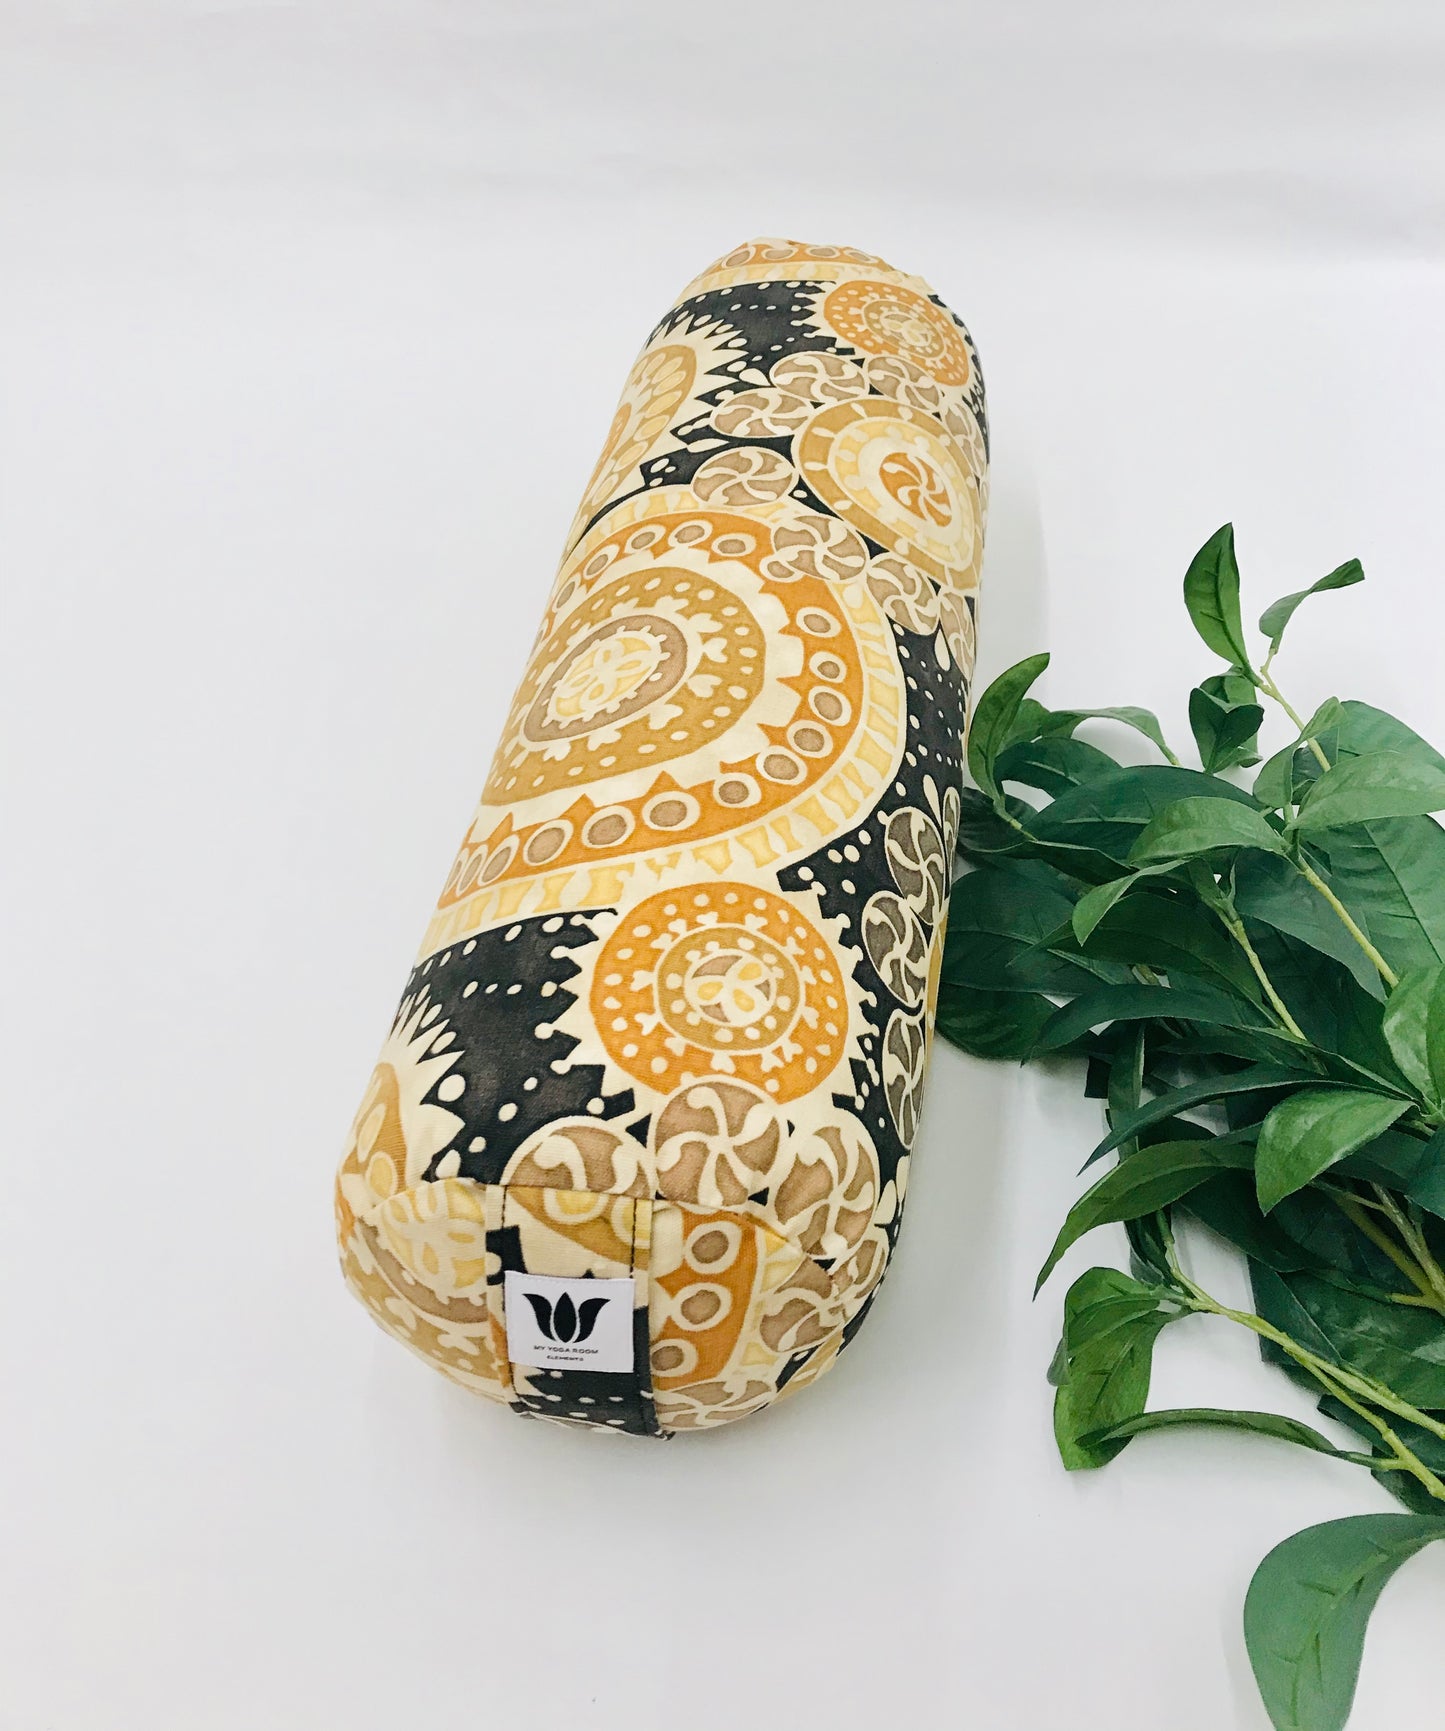 Round yoga bolster in durable cotton canvas, in black and bright colour novelty print fabric. Allergy conscious fill with removeable cover. Made in Canada by My Yoga Room Elements